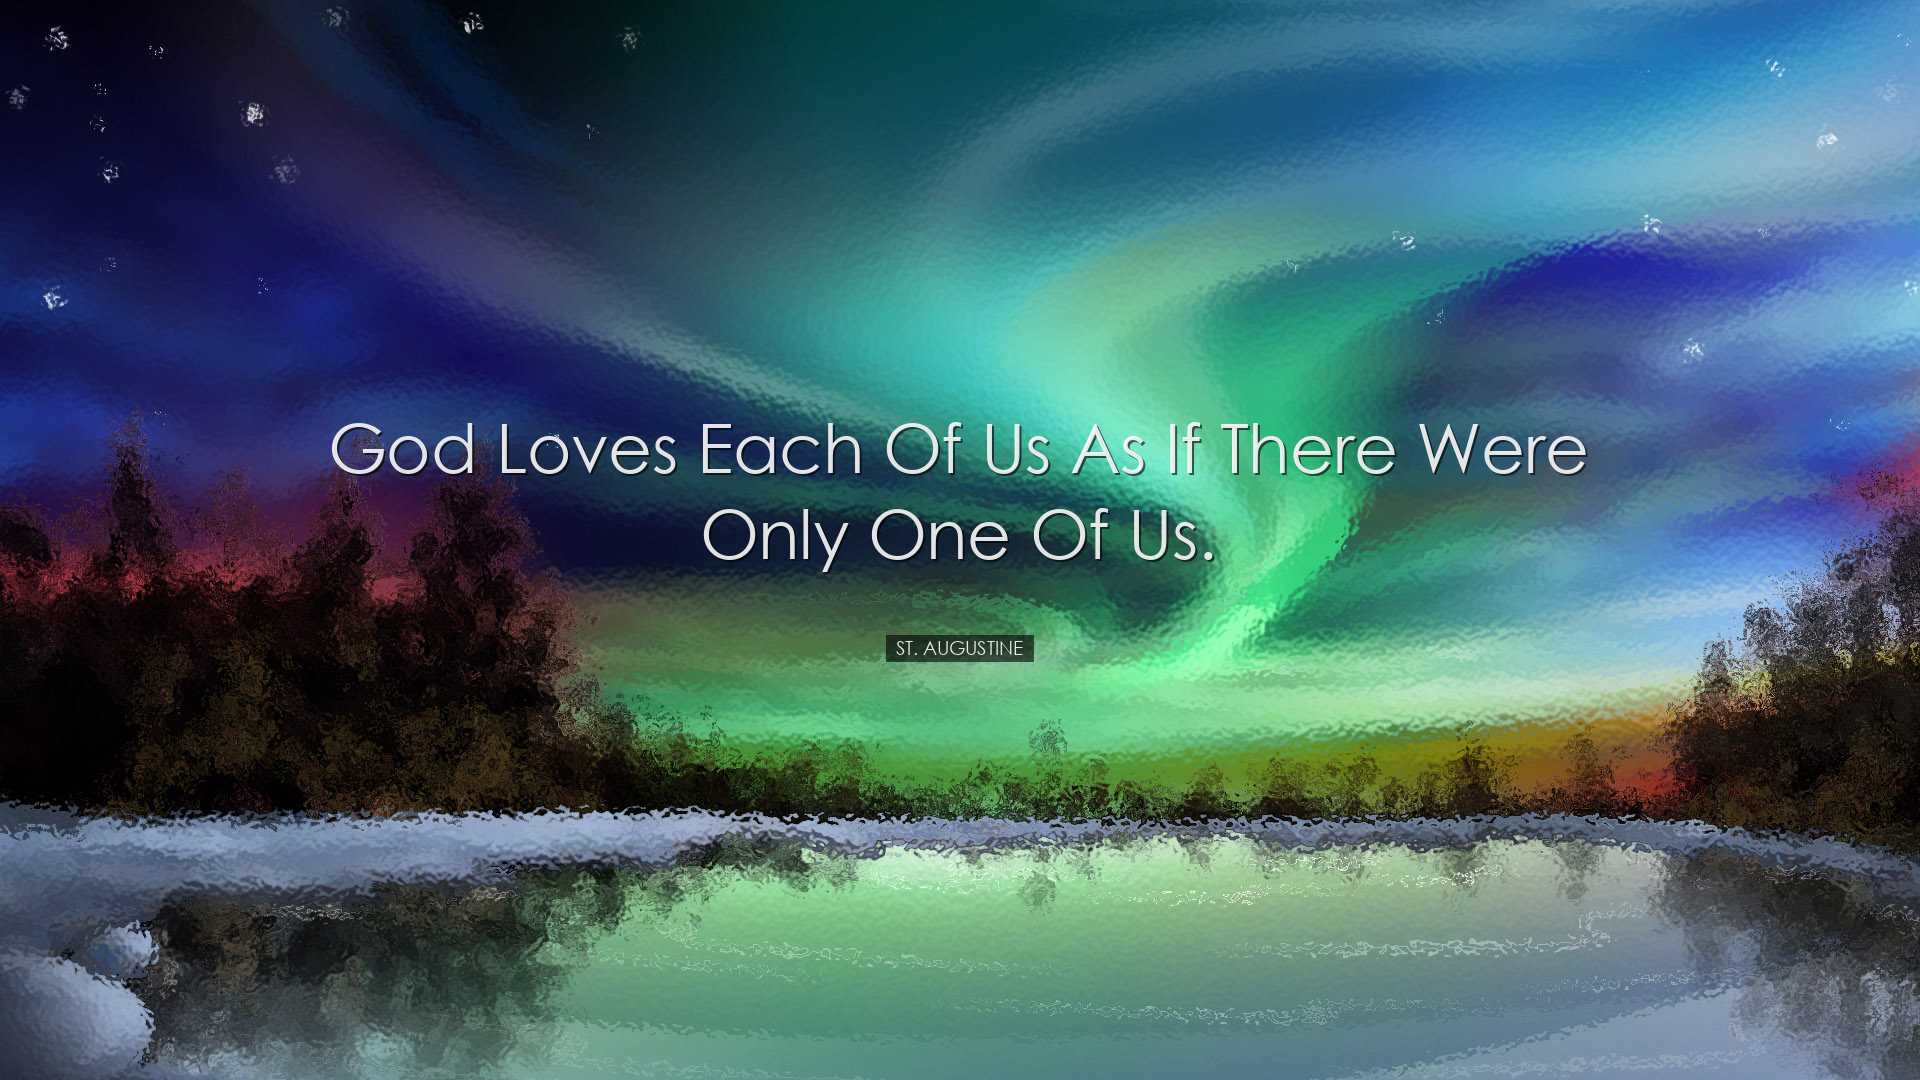 God loves each of us as if there were only one of us. - St. August